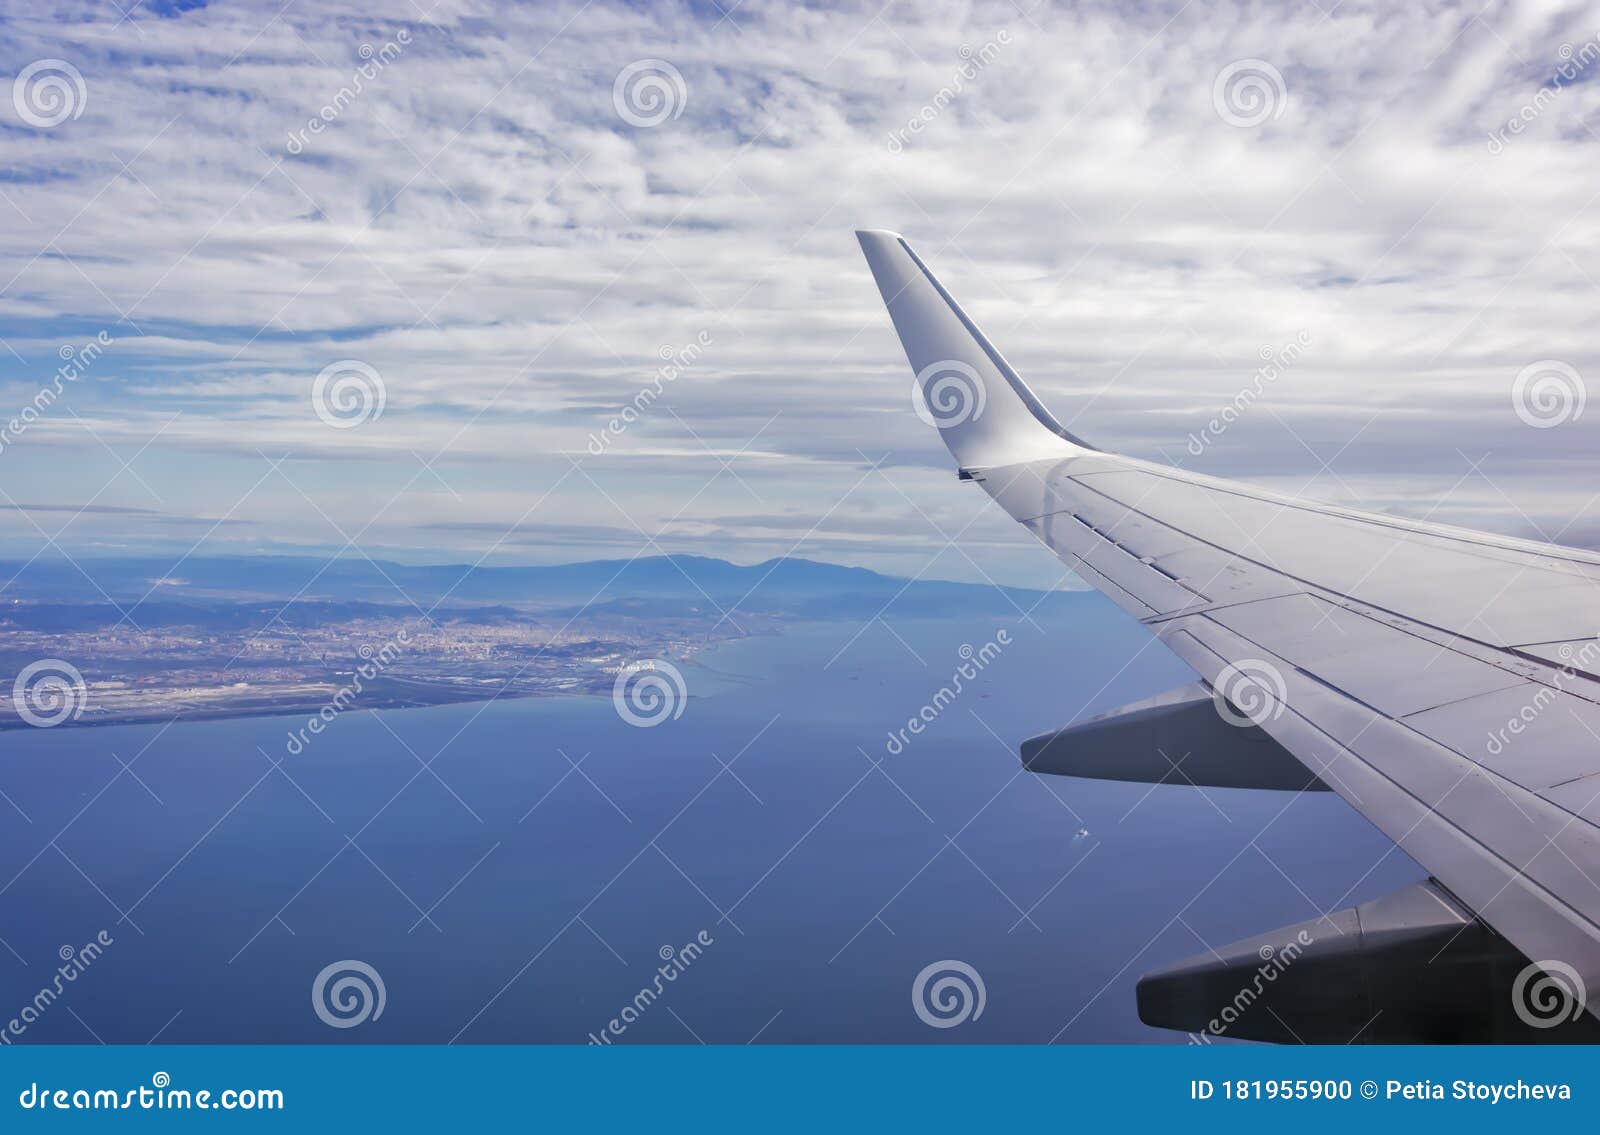 view of the wing of an airplane flying above the clouds at high altitude under a blue sky from the passenger window. in flight